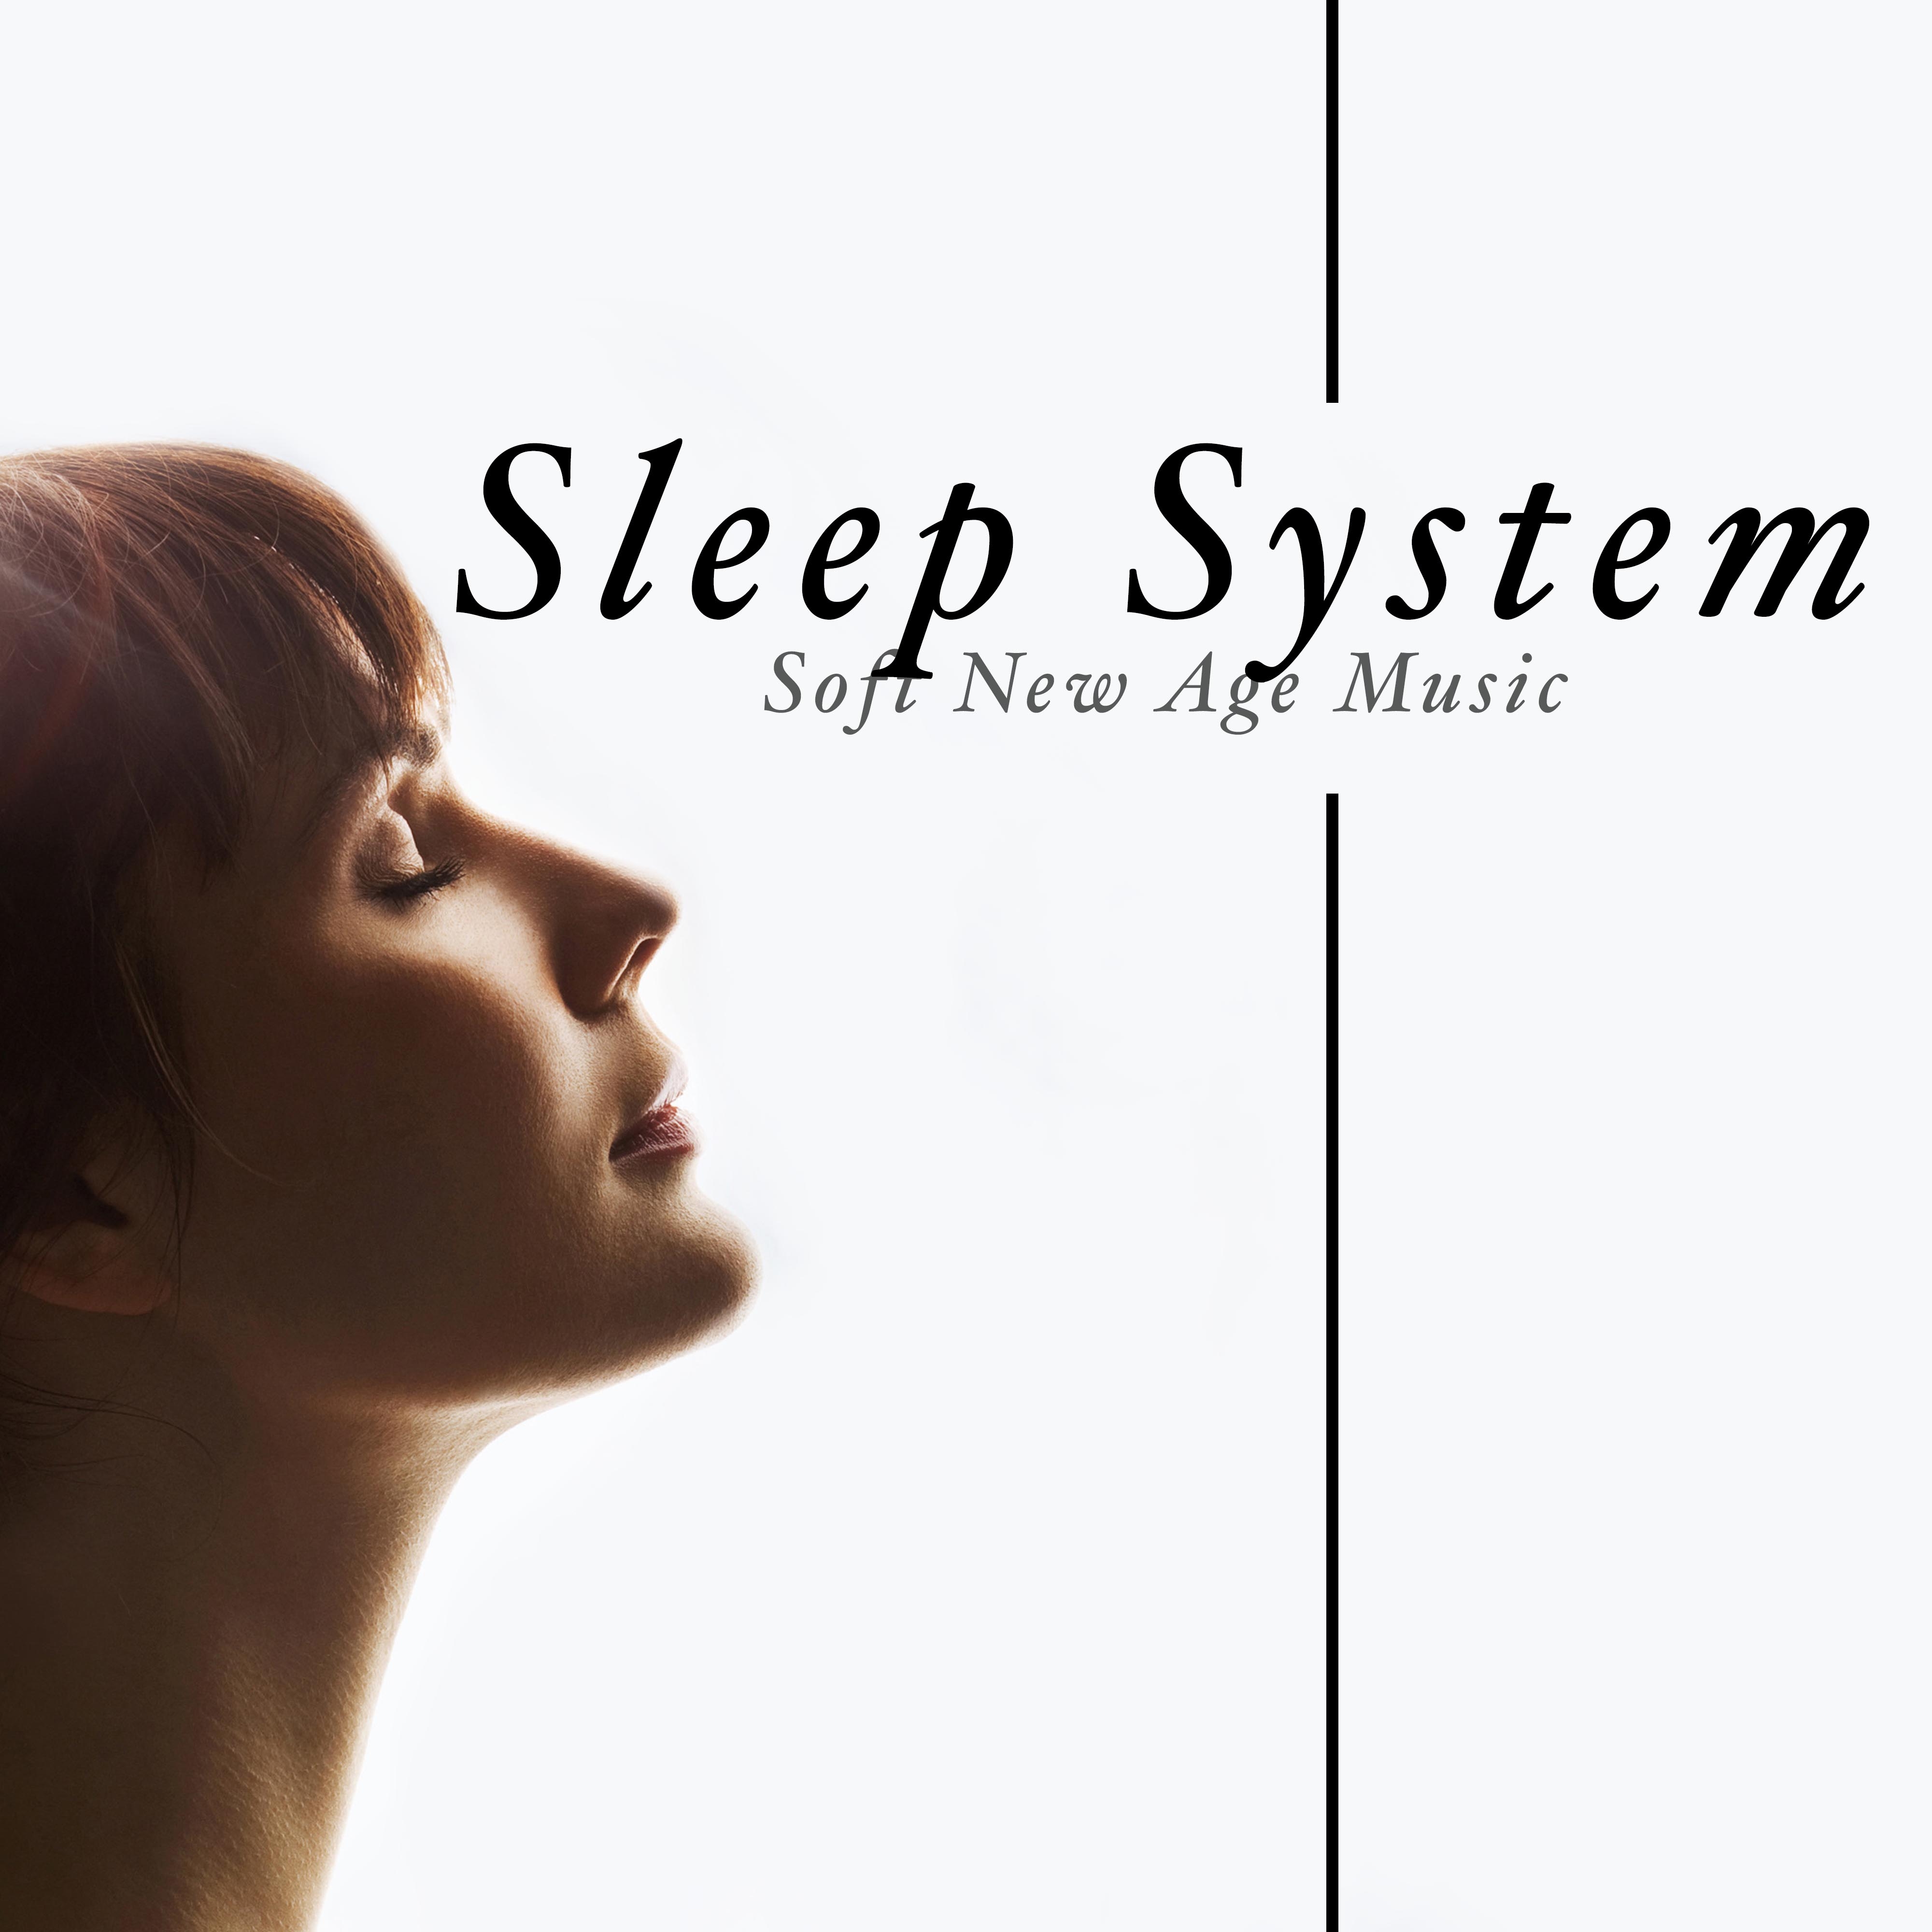 Sleep System - Soft New Age Music to Help you relax before Bedtime for a Good Night's Sleep